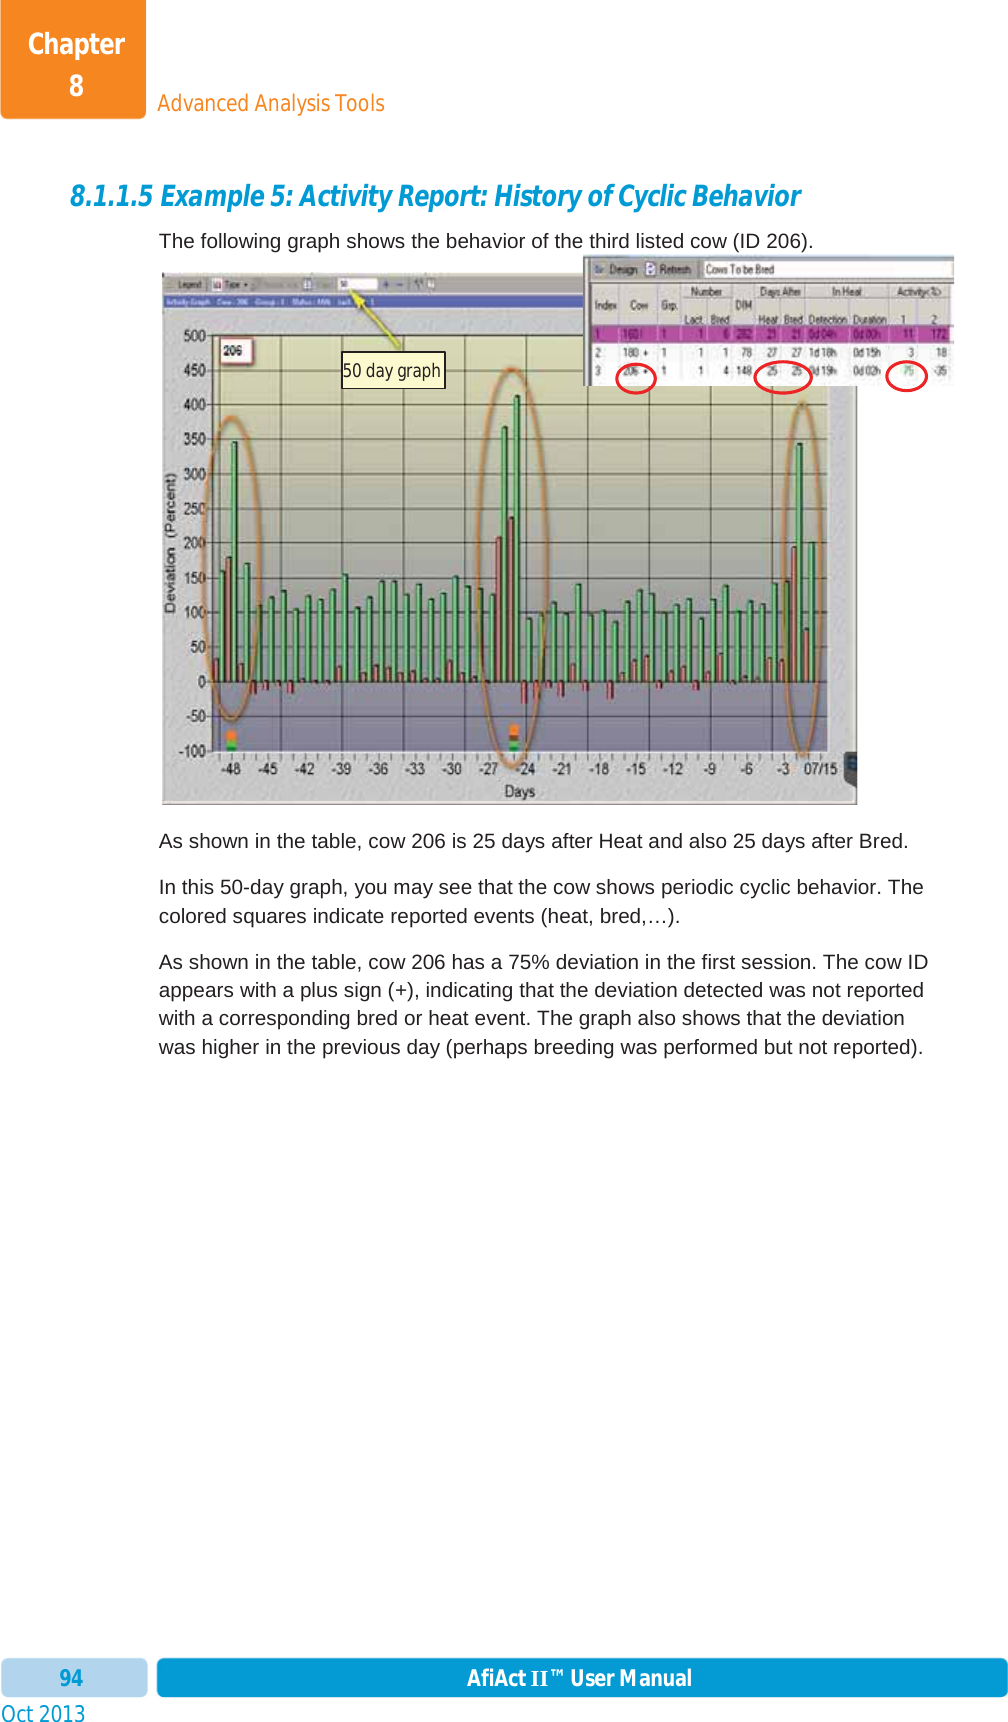 Oct 2013 AfiAct II™ User Manual94Advanced Analysis ToolsChapter 88.1.1.5 Example 5: Activity Report: History of Cyclic Behavior  The following graph shows the behavior of the third listed cow (ID 206). As shown in the table, cow 206 is 25 days after Heat and also 25 days after Bred. In this 50-day graph, you may see that the cow shows periodic cyclic behavior. The colored squares indicate reported events (heat, bred,…). As shown in the table, cow 206 has a 75% deviation in the first session. The cow ID appears with a plus sign (+), indicating that the deviation detected was not reported with a corresponding bred or heat event. The graph also shows that the deviation was higher in the previous day (perhaps breeding was performed but not reported). 50 day graph 